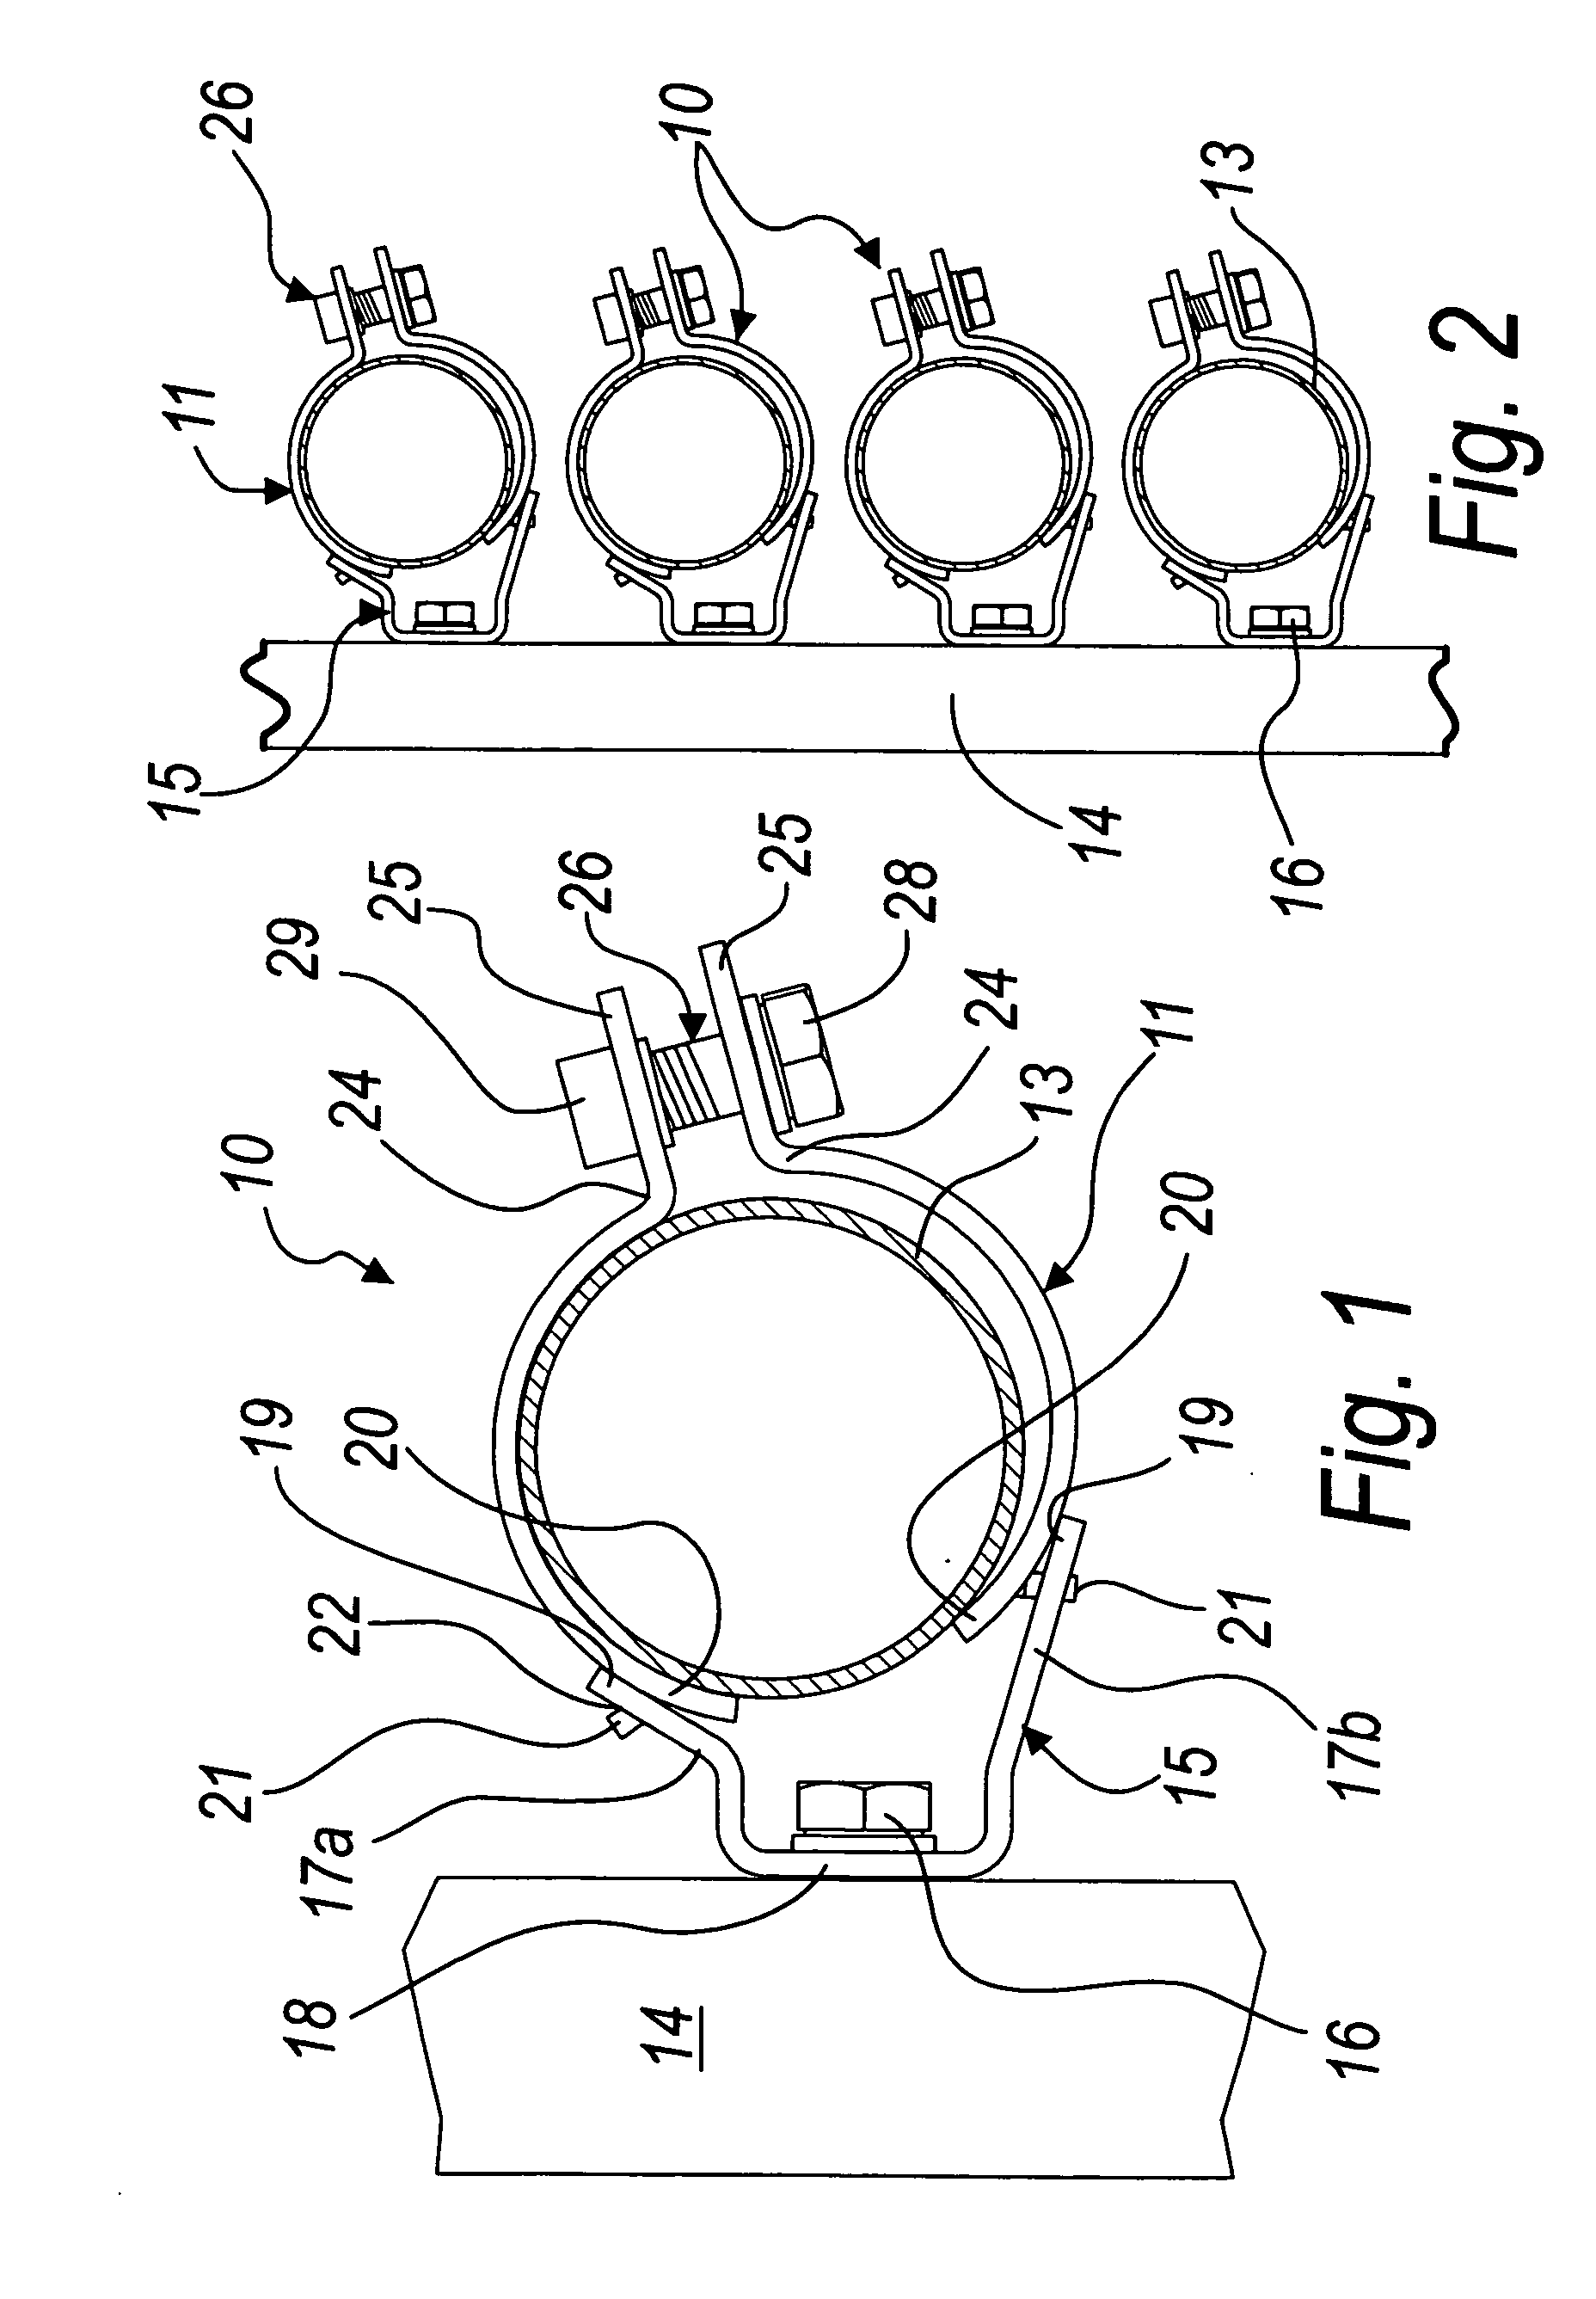 Device for fixing pipes to supporting structures